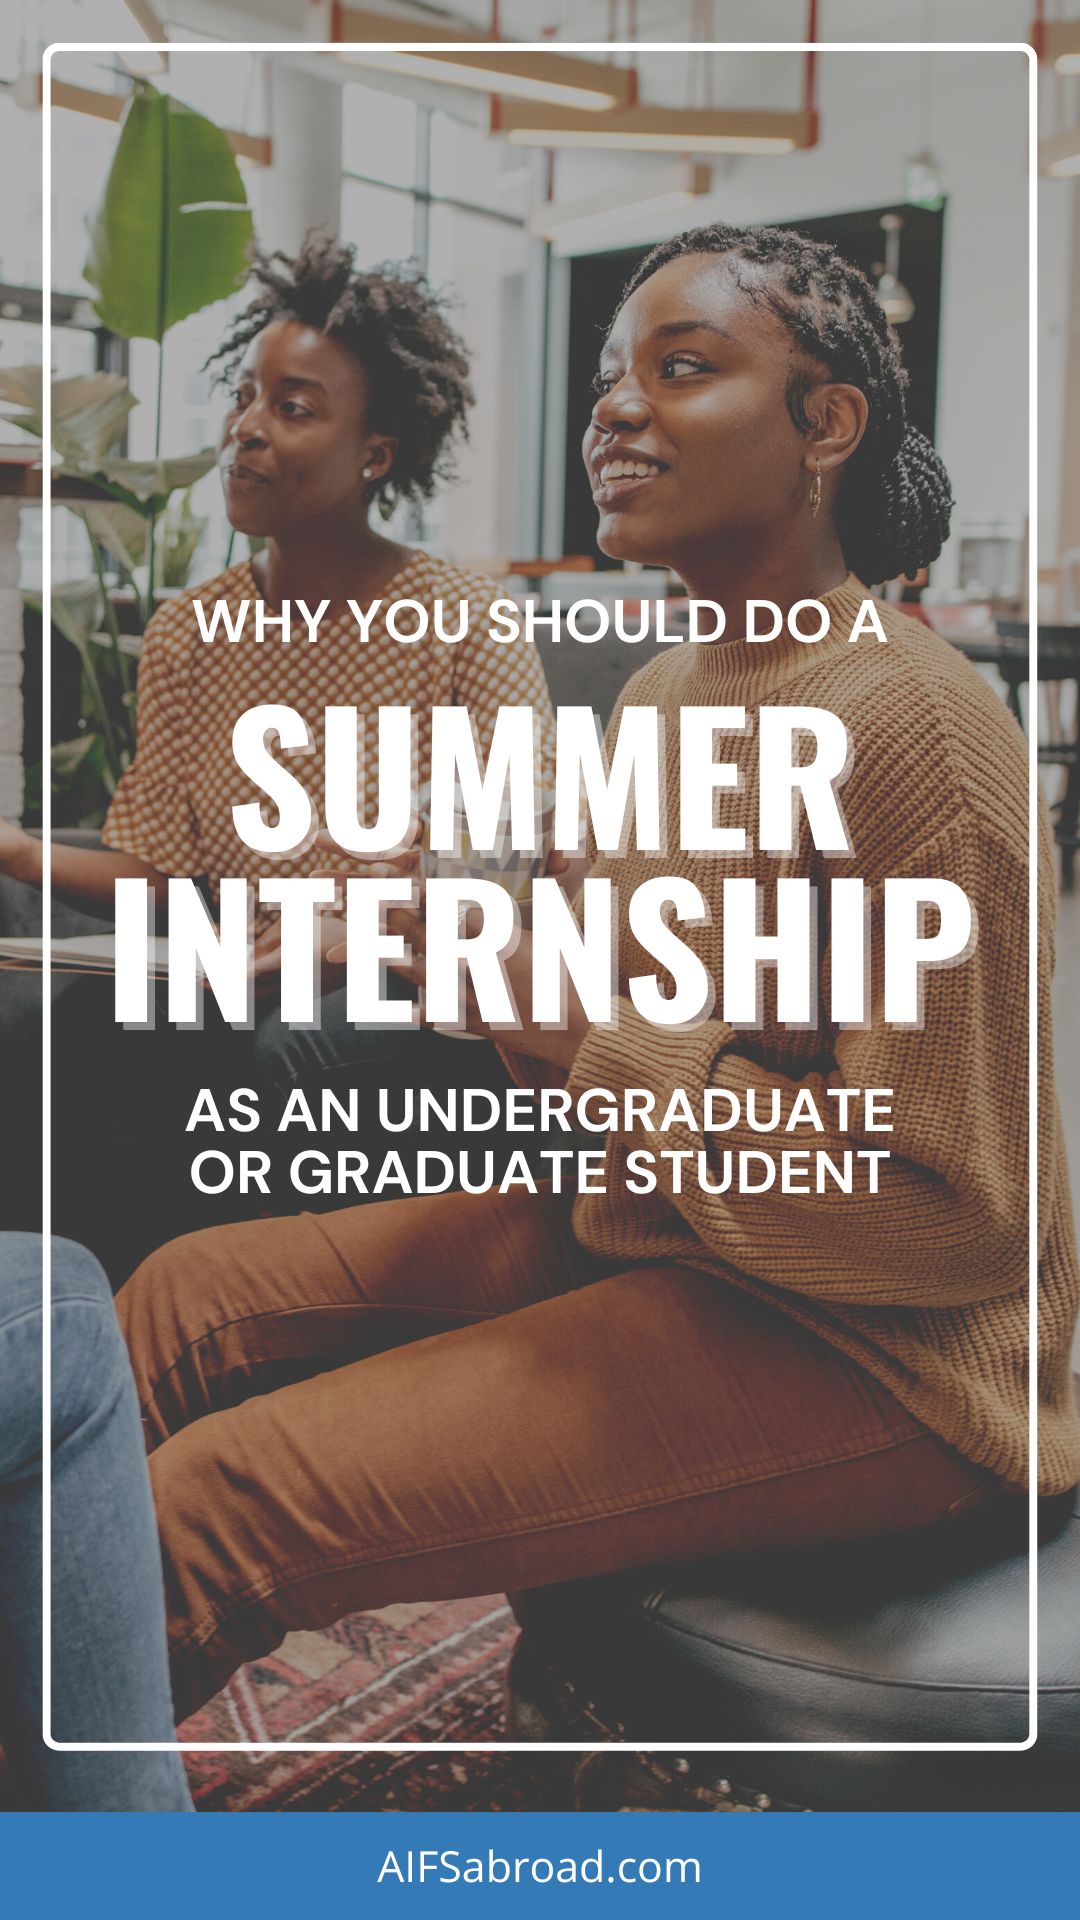 Pin image: Why you should do a summer internship as an undergraduate or graduate student